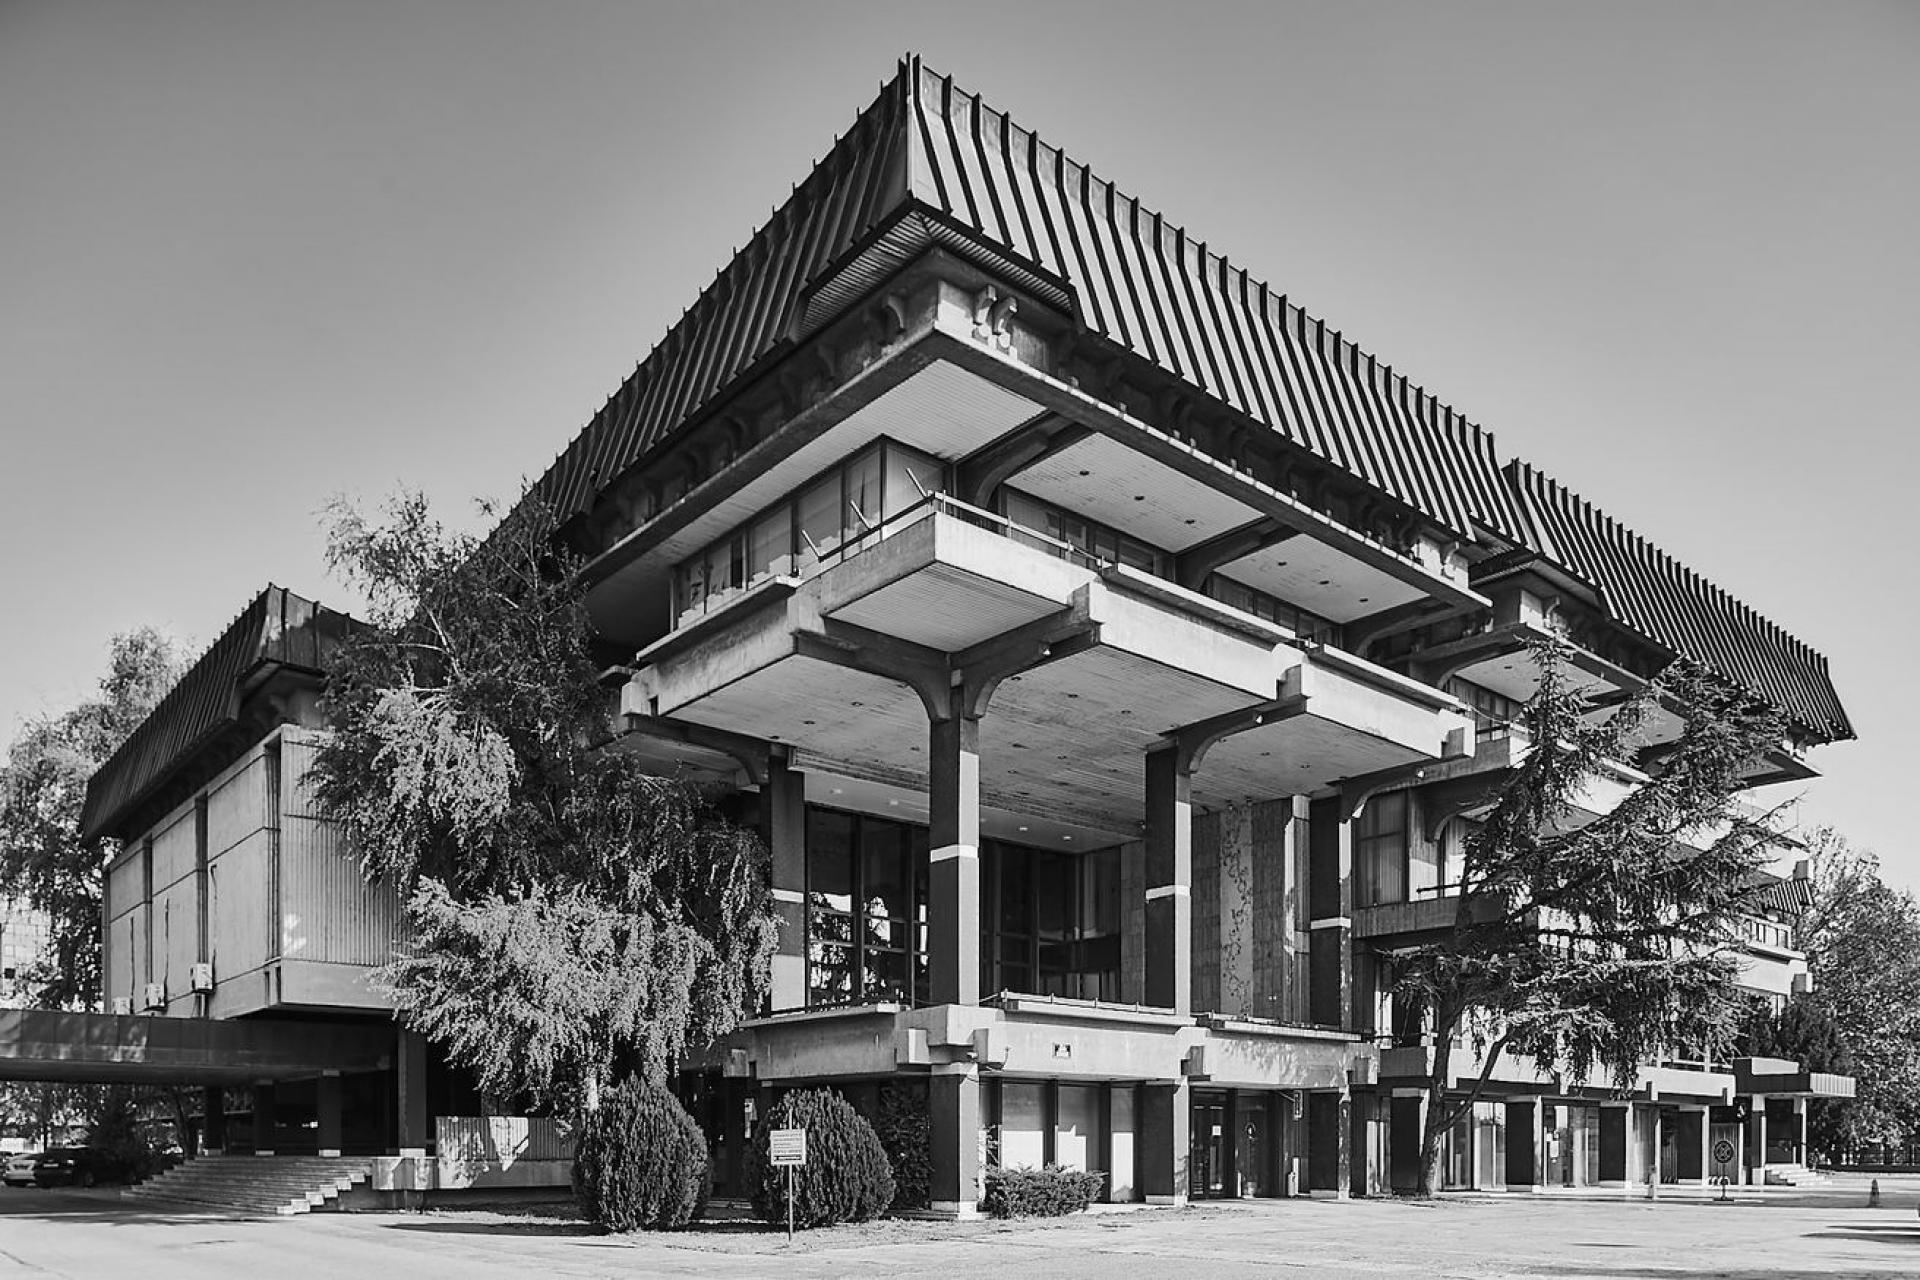 Boris Cipan received the most prestigious architecture prize that the Borba newspaper awarded annually for the greatest architectural achievement in Yugoslavia for the The Macedonian Academy of Sciences and Arts in 1976.